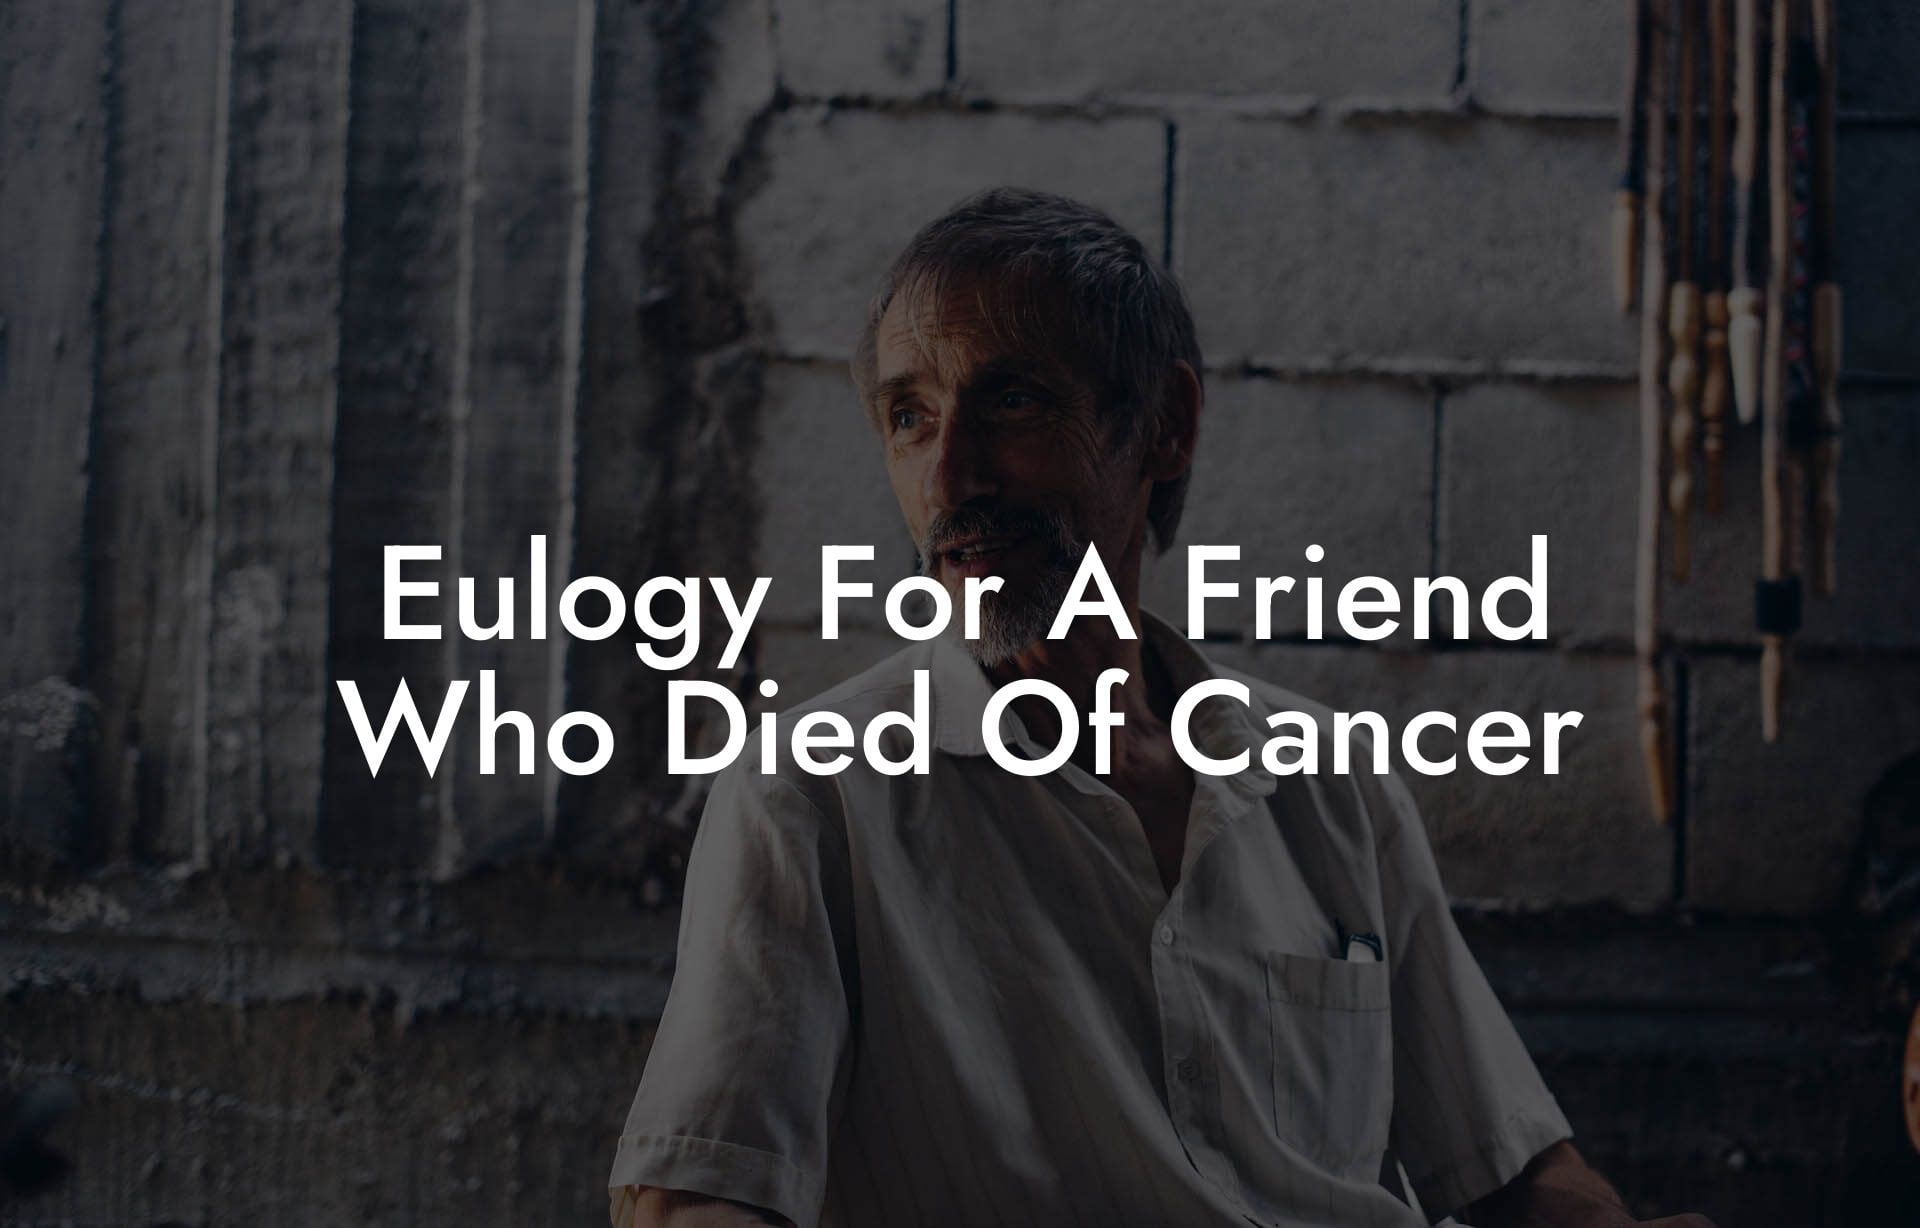 Eulogy For A Friend Who Died Of Cancer